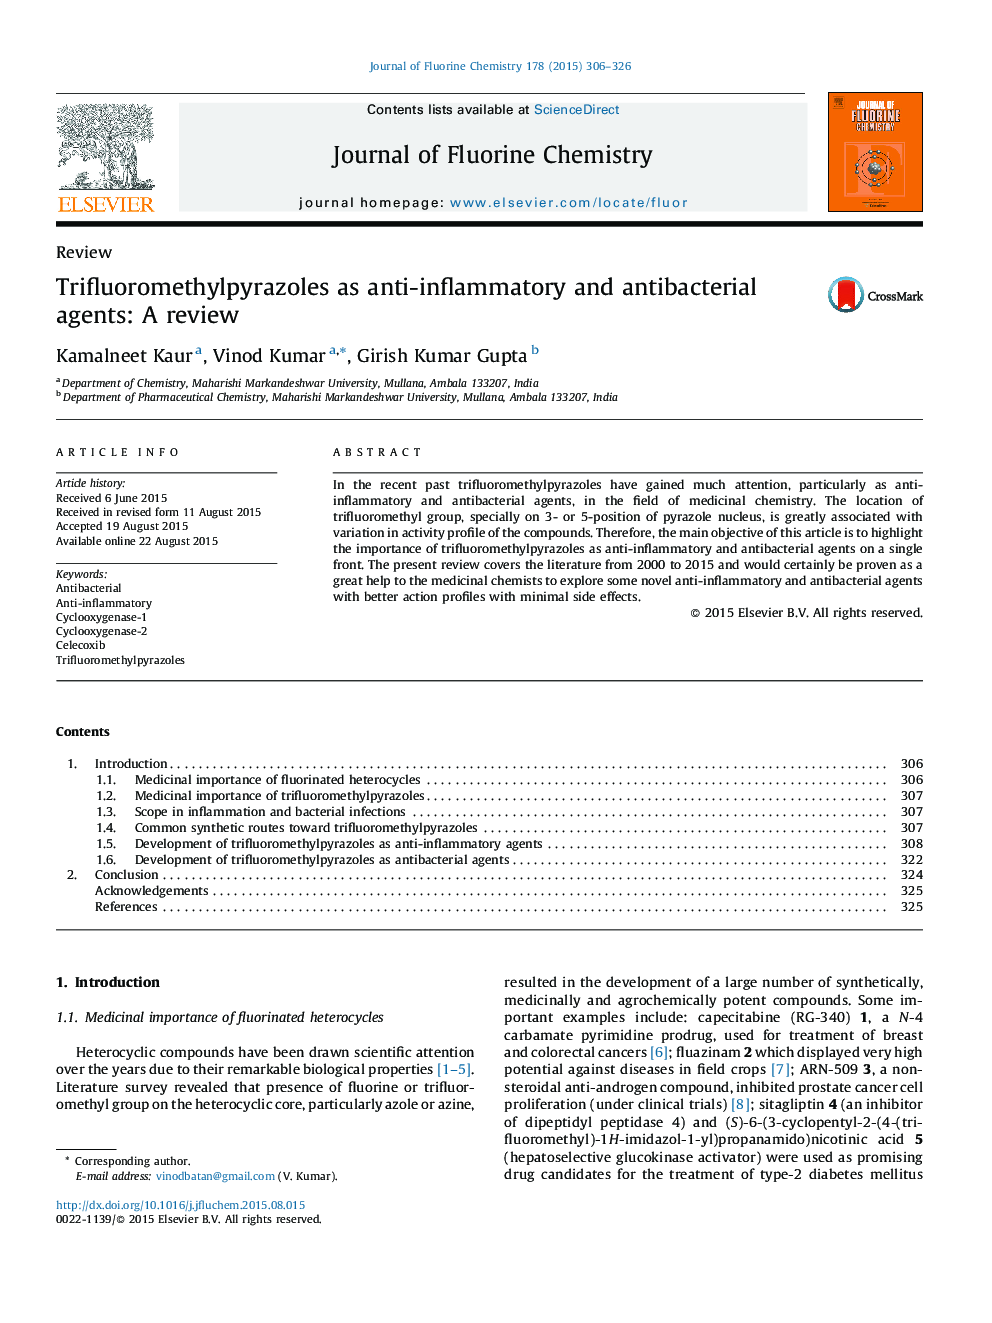 Trifluoromethylpyrazoles as anti-inflammatory and antibacterial agents: A review